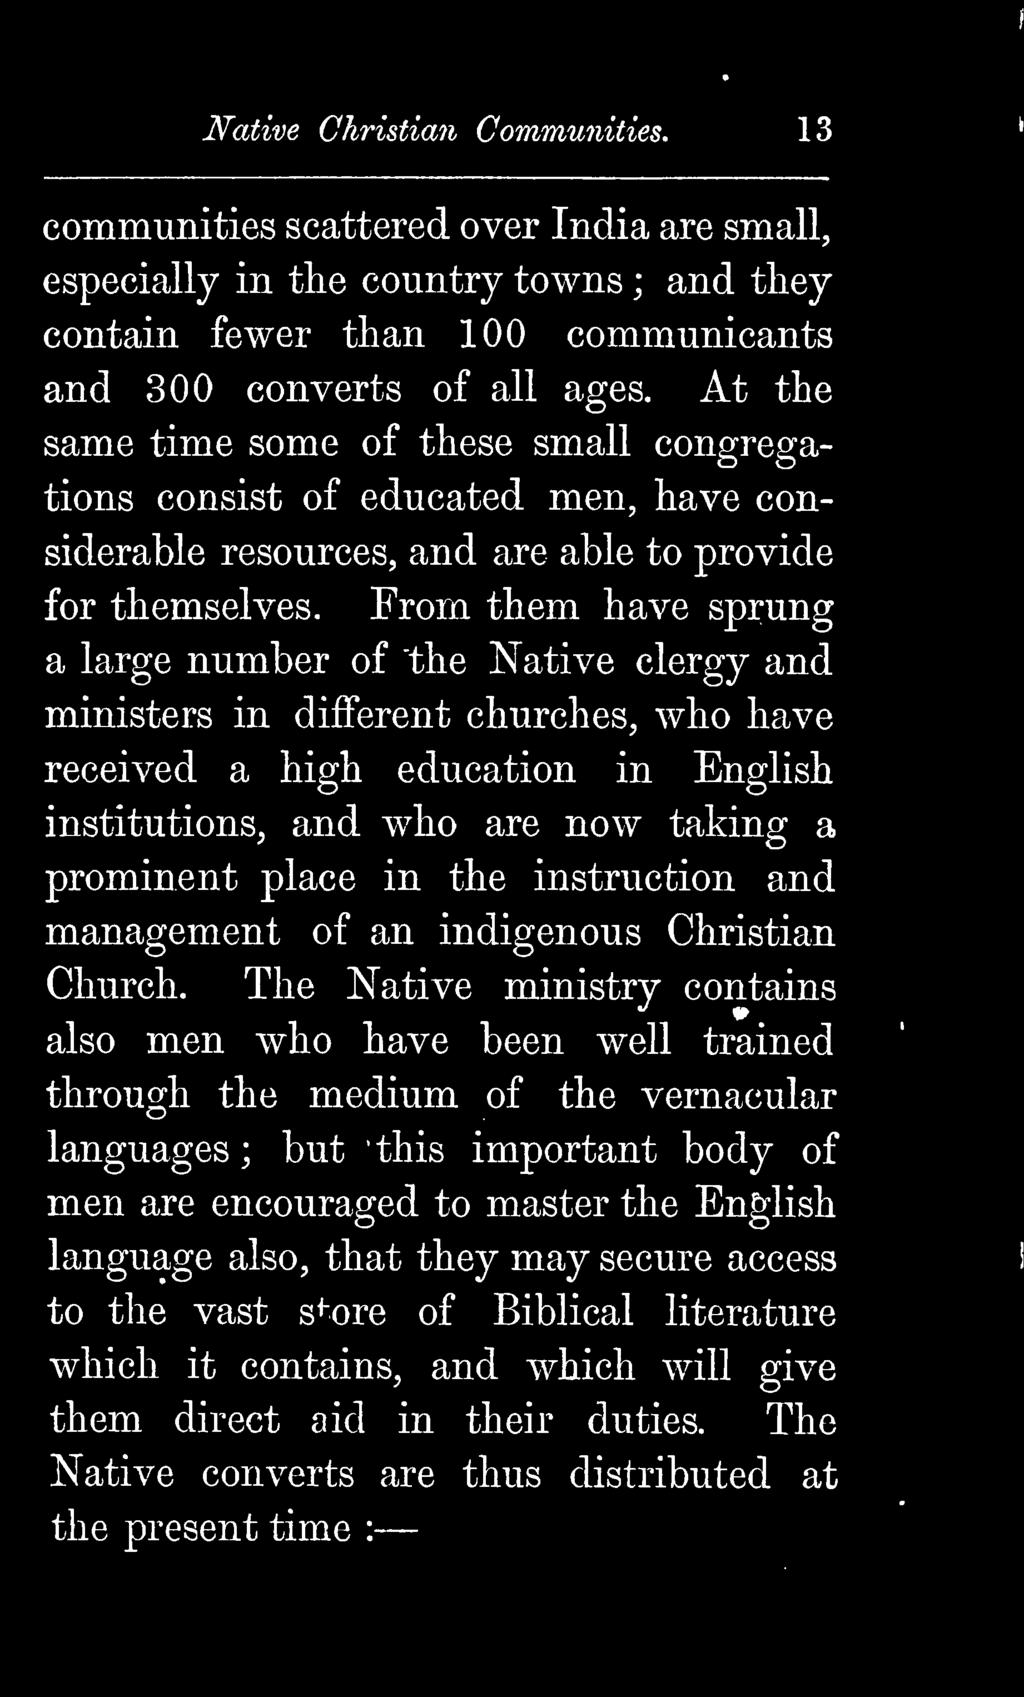 Native Christian Communities. 13 communities scattered over India are small, especially in the country towns ; and tliey contain fewer than 100 communicants and 300 converts of all ages.